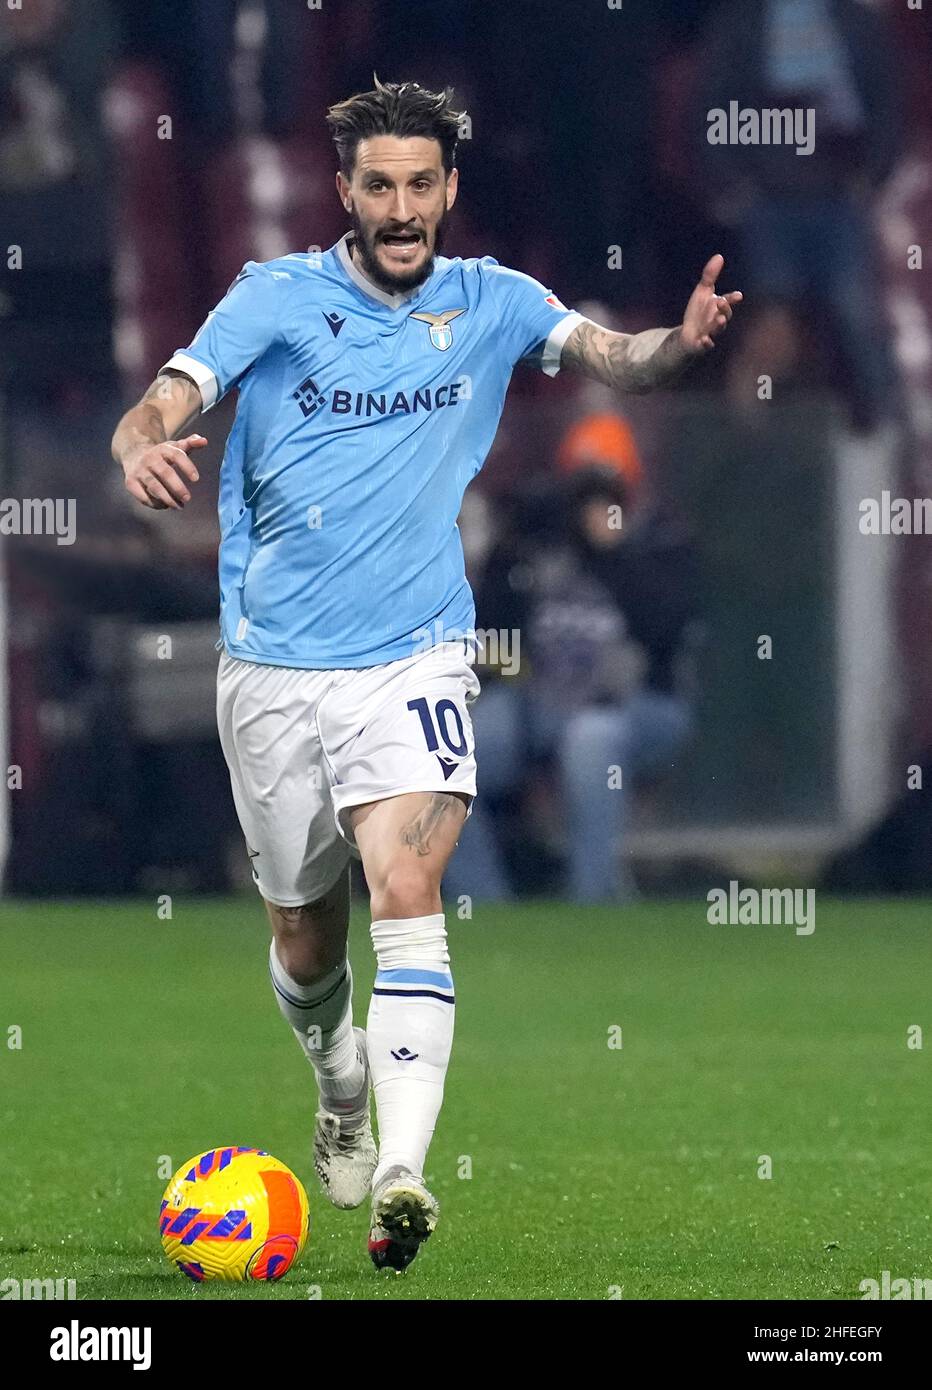 SALERNO, ITALY - JANUARY 15: Luis Alberto of SS Lazio in action,during the Serie A match between US Salernitana and SS Lazio at Stadio Arechi on January 16, 2022 in Salerno, Italy. (Photo by MB Media) Stock Photo